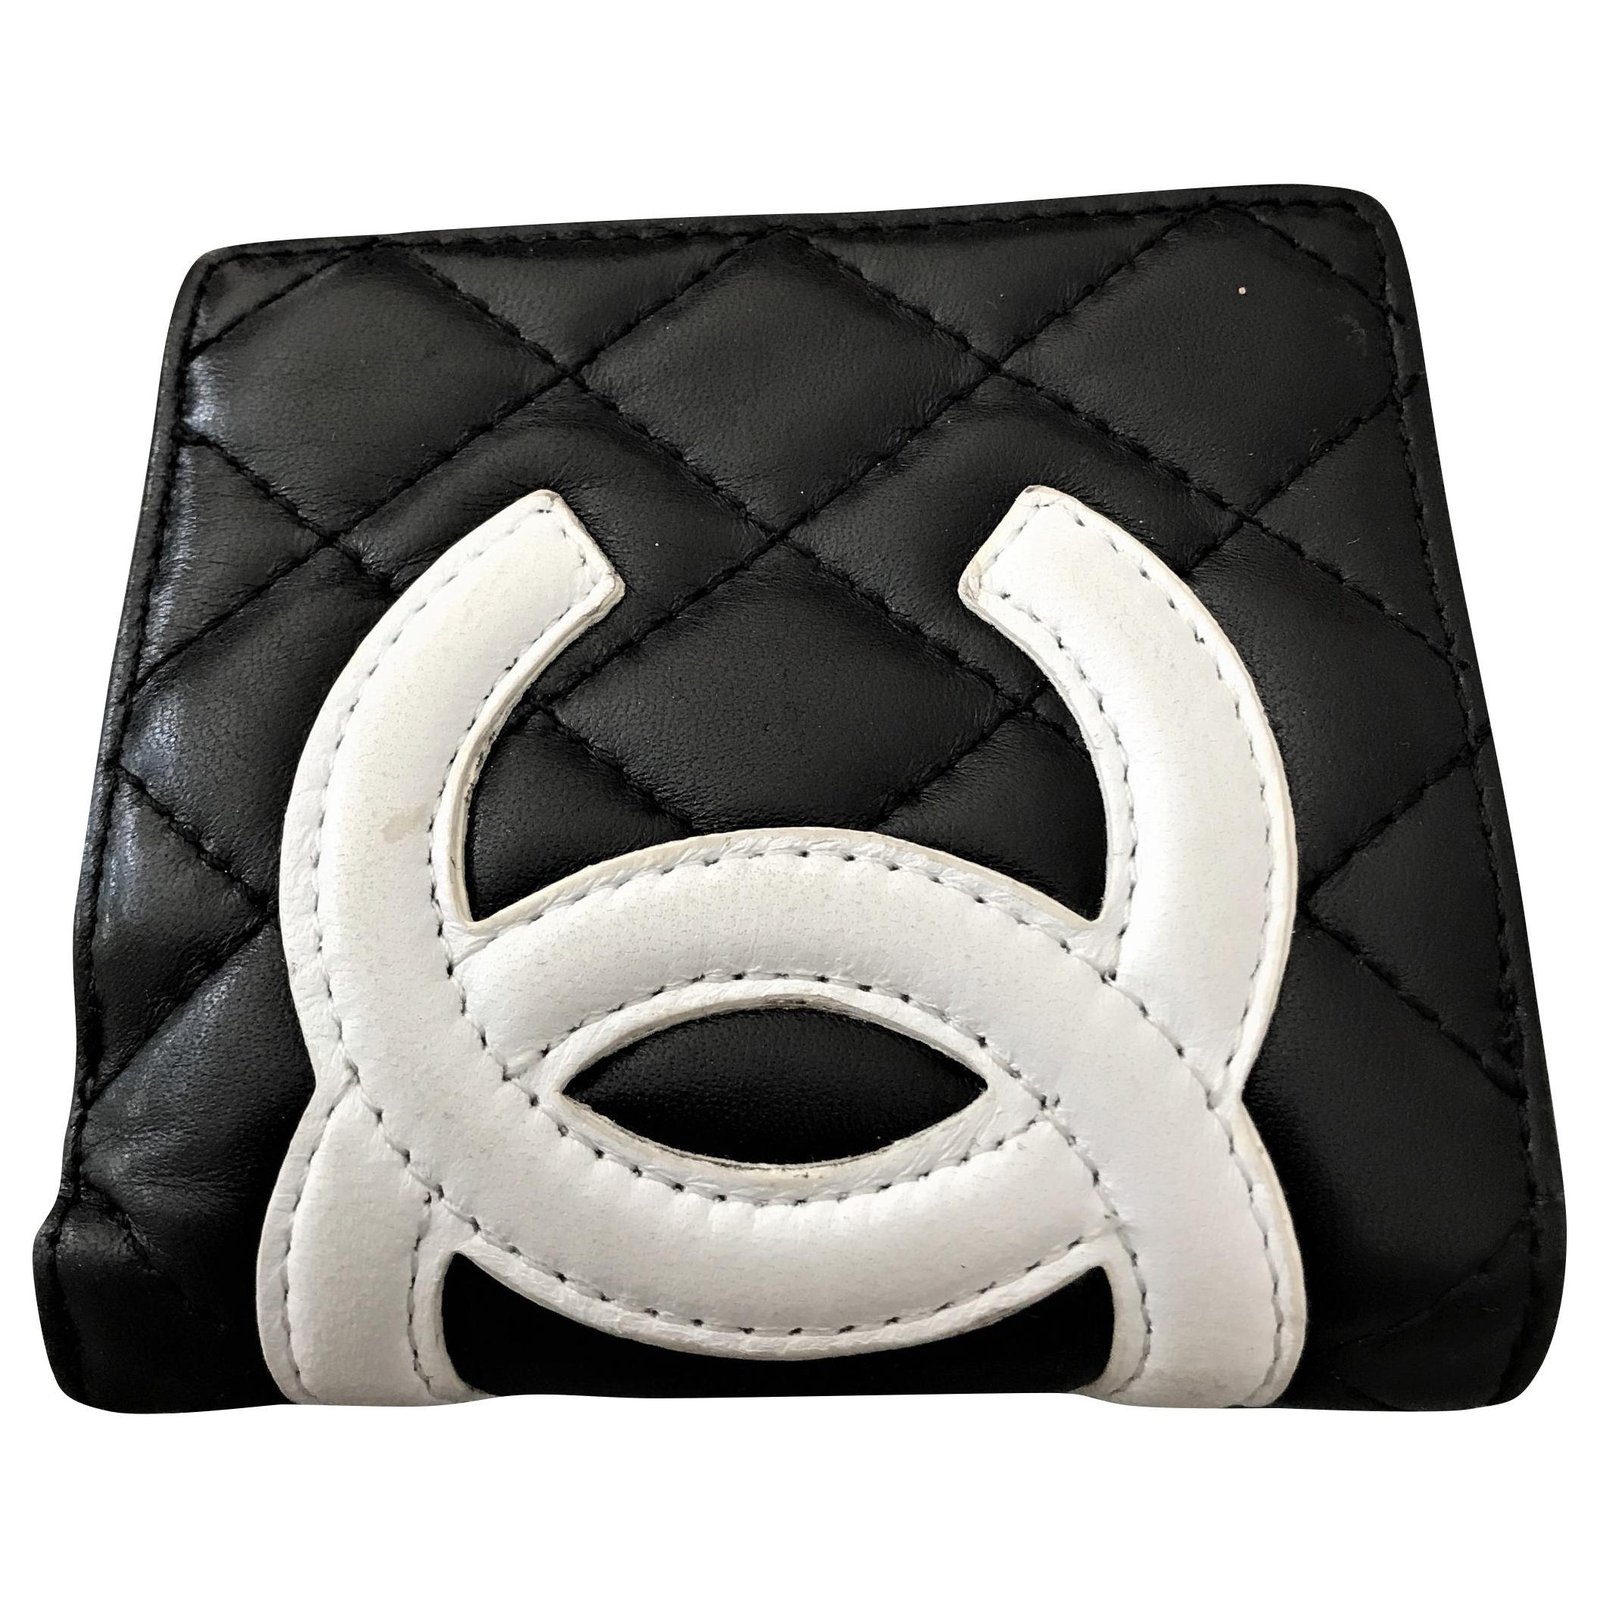 Chanel - Authenticated Cambon Wallet - Leather Black for Women, Very Good Condition